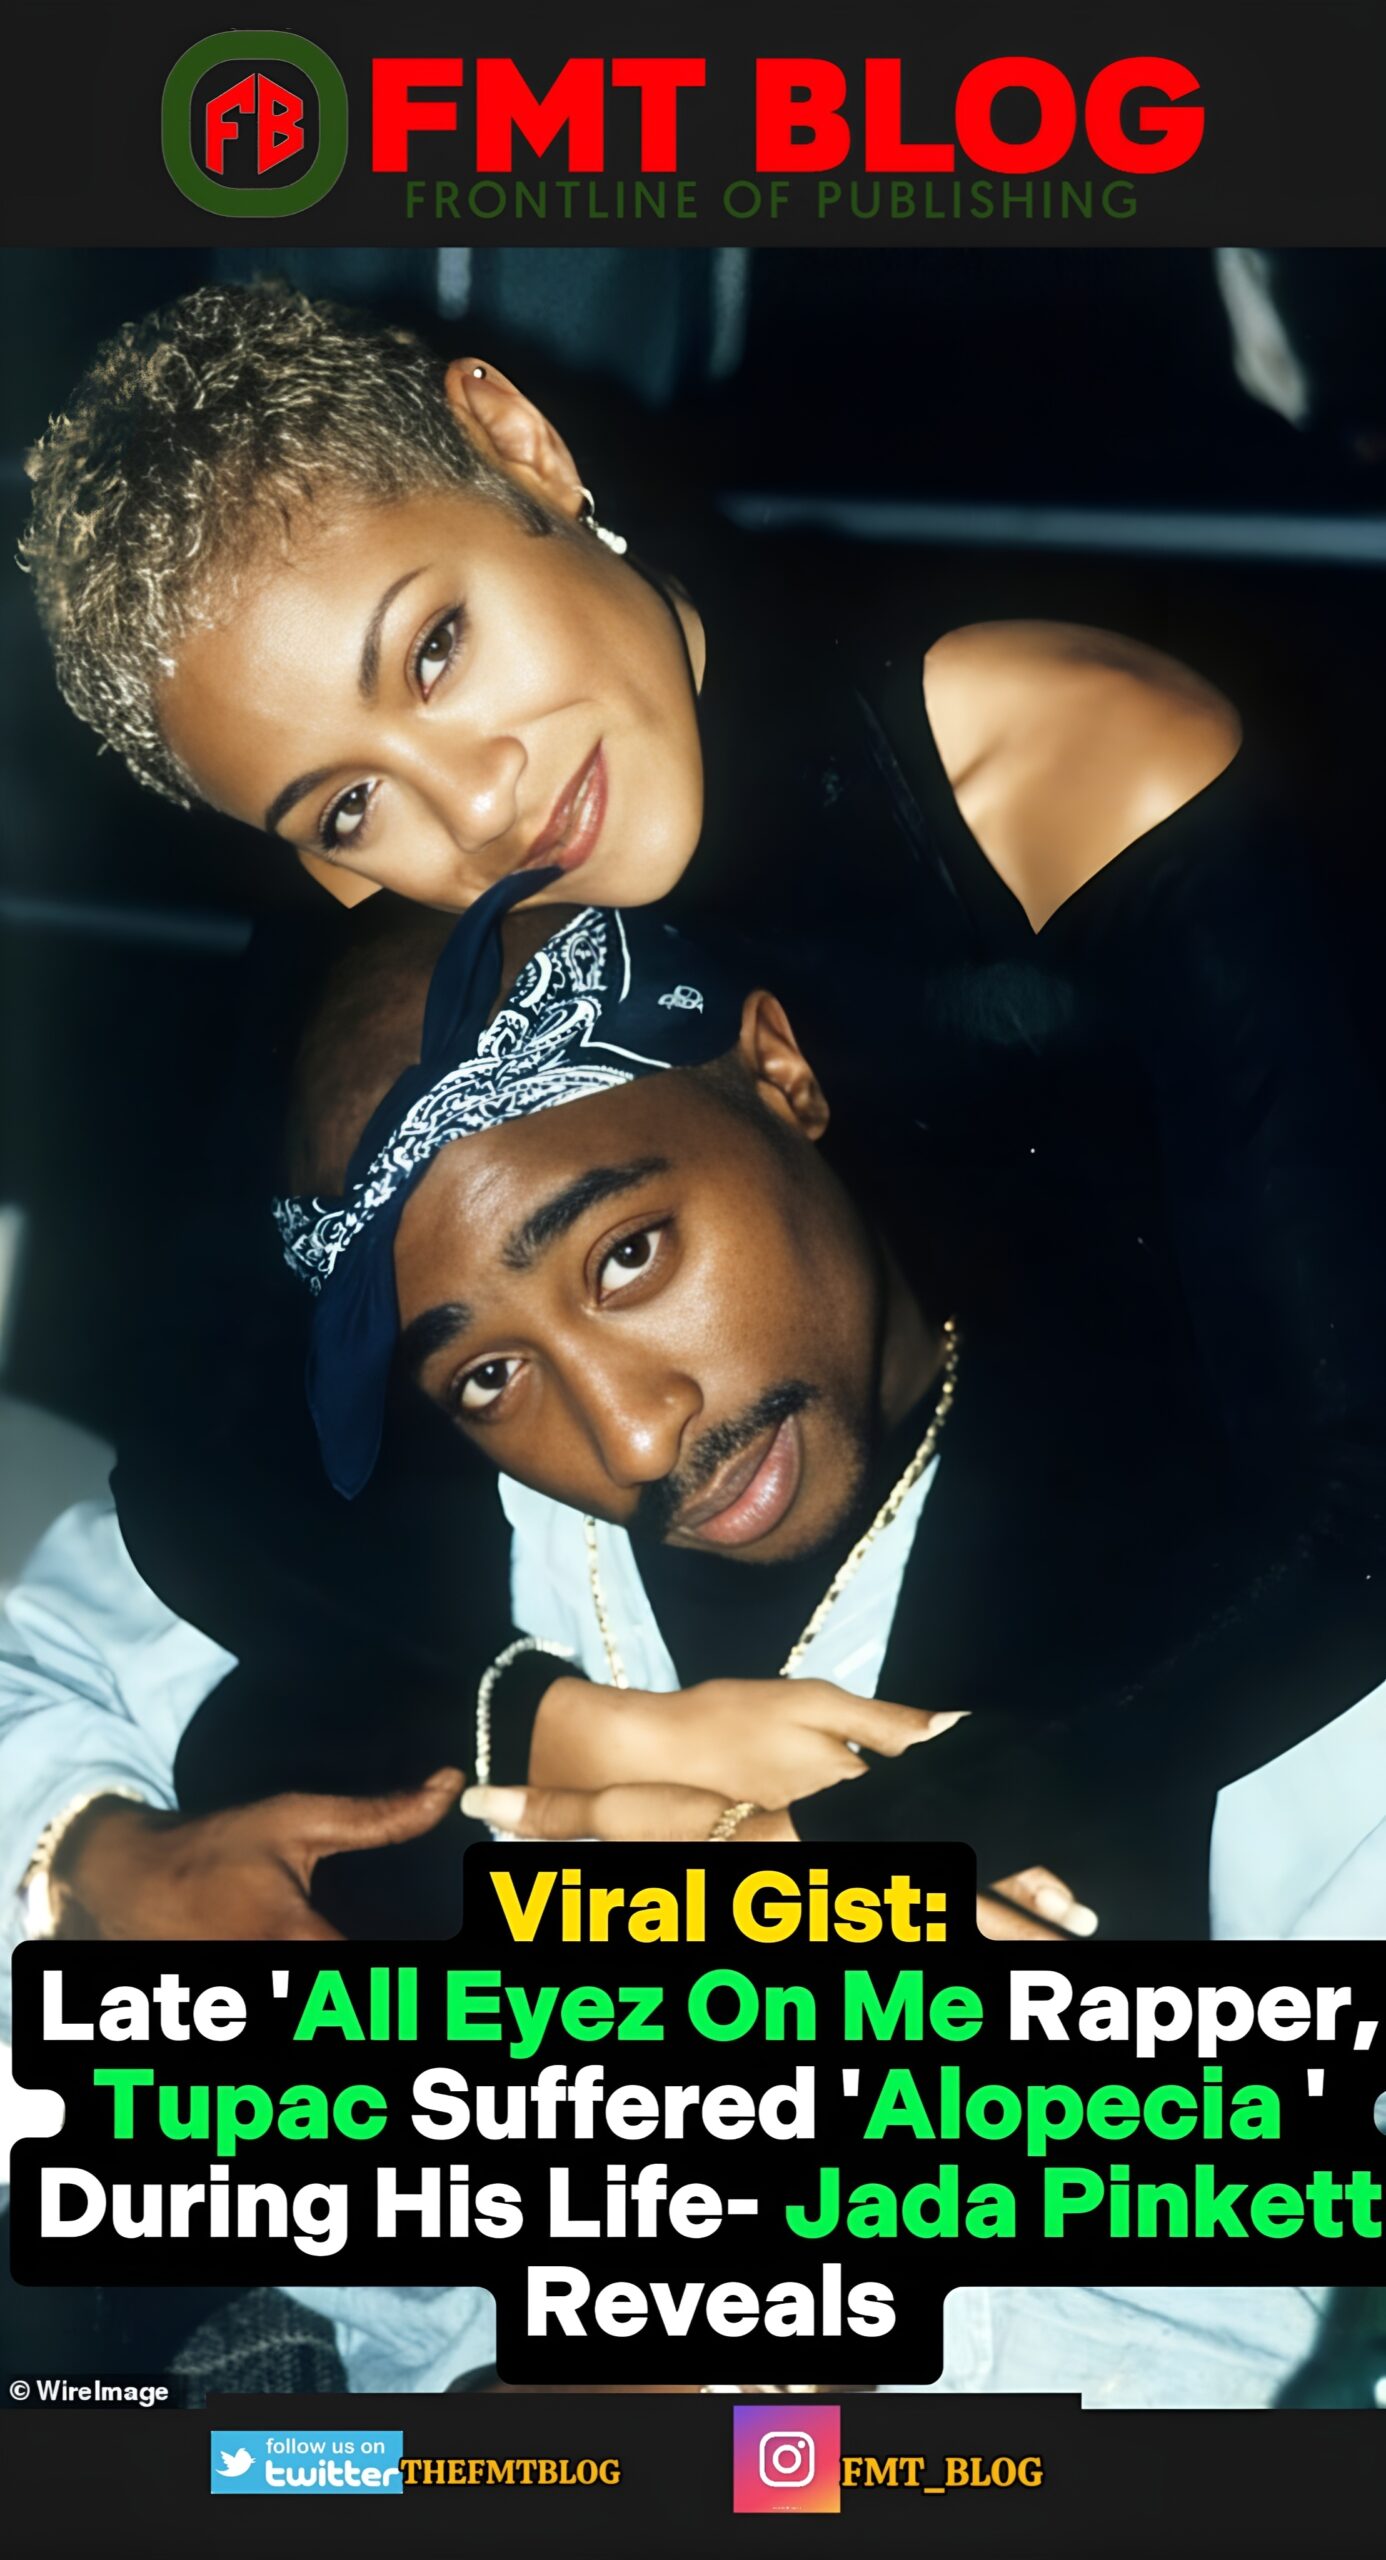 Late ‘All Eyez On Me Rapper’ Tupac Suffered ‘Alopecia’ During His Life- Jada Pinkett Reveals